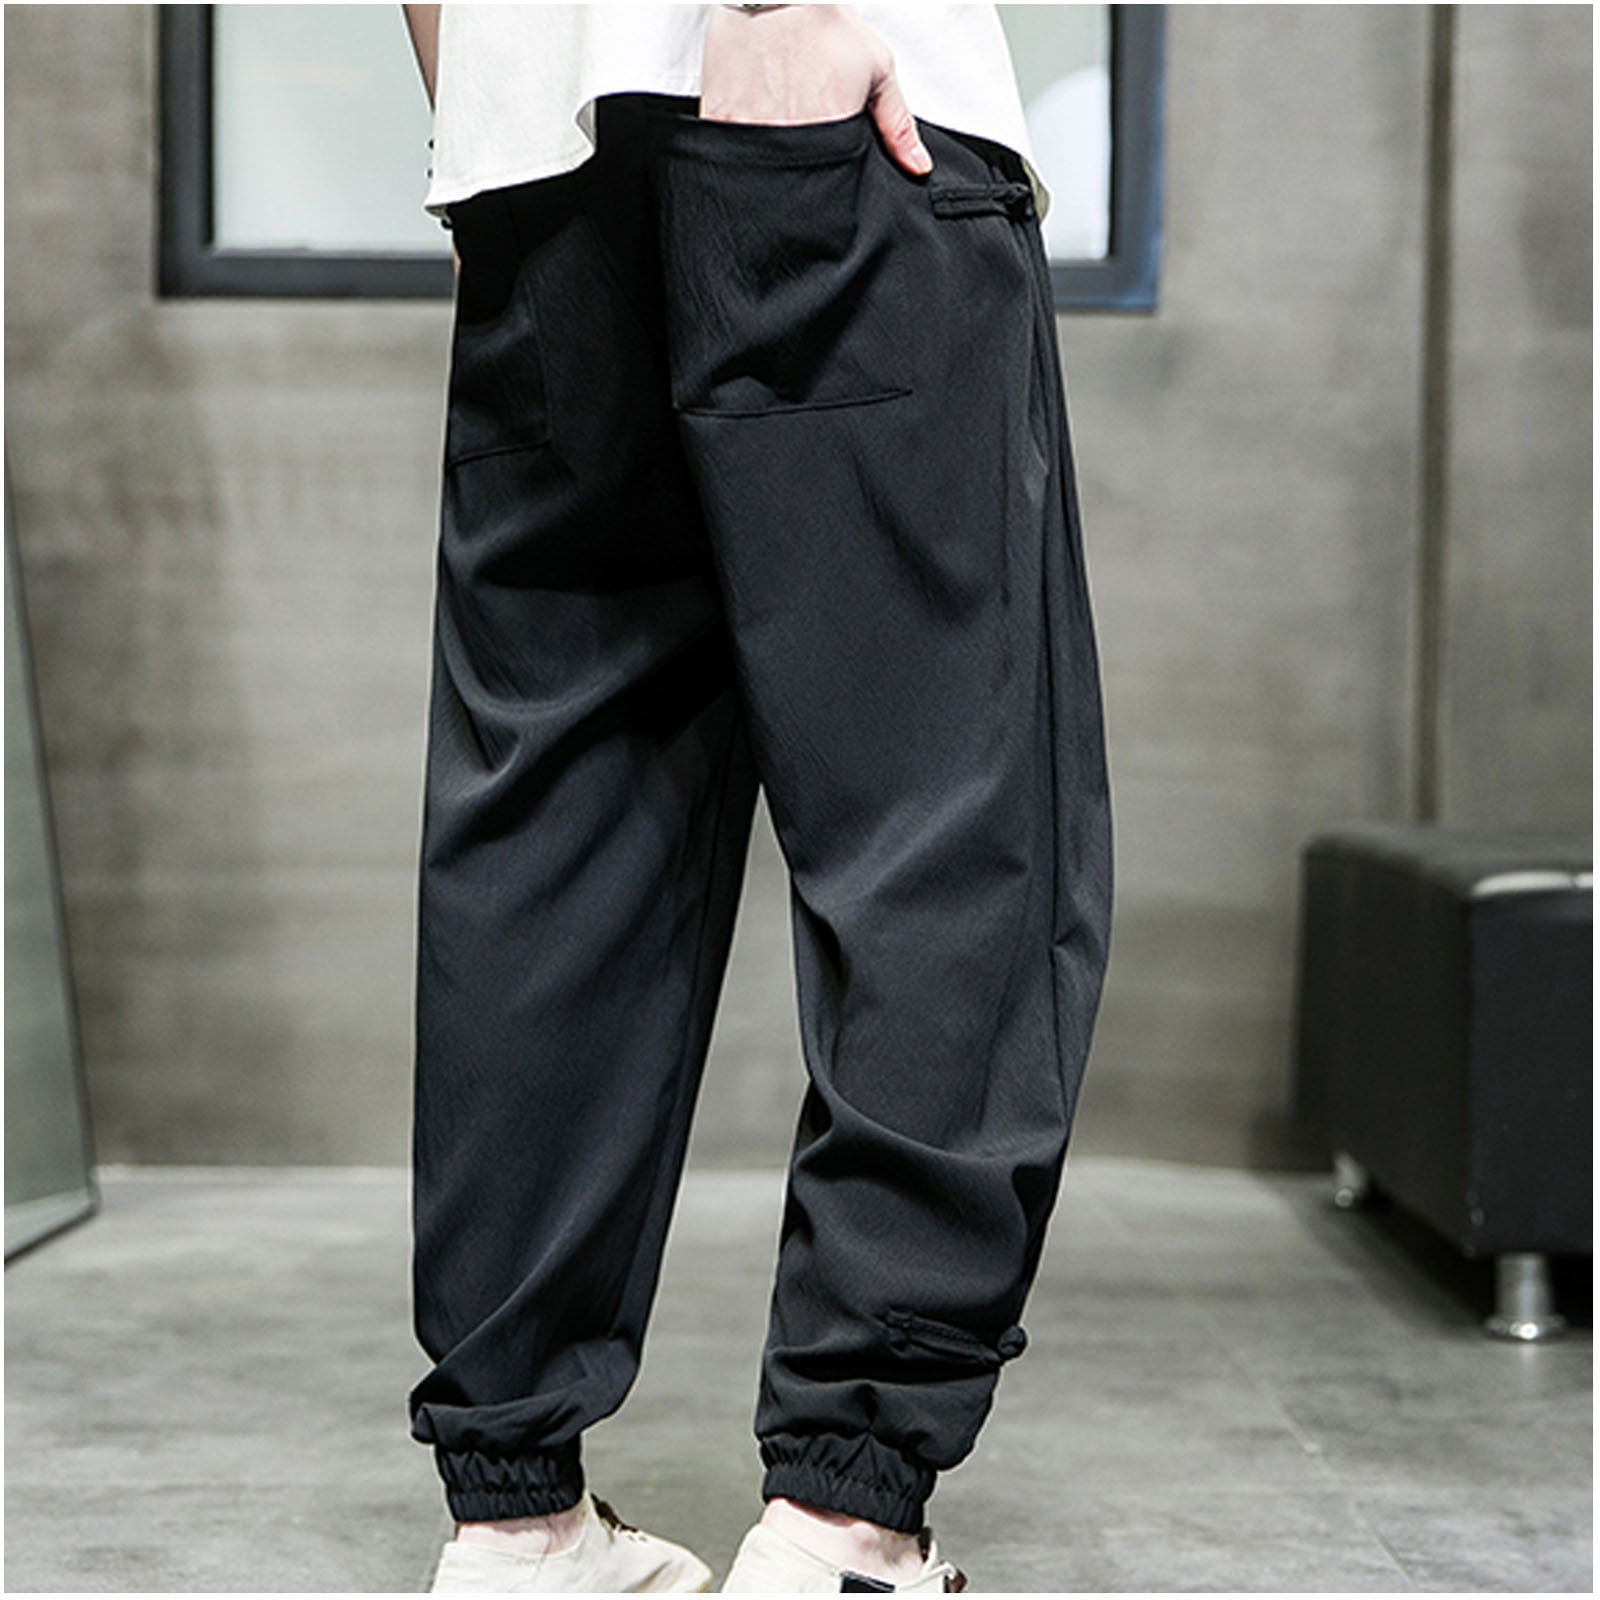 Casual Dress Men Pants ⎮ SWS Clothing and Accessories – Streetwear Society  Store